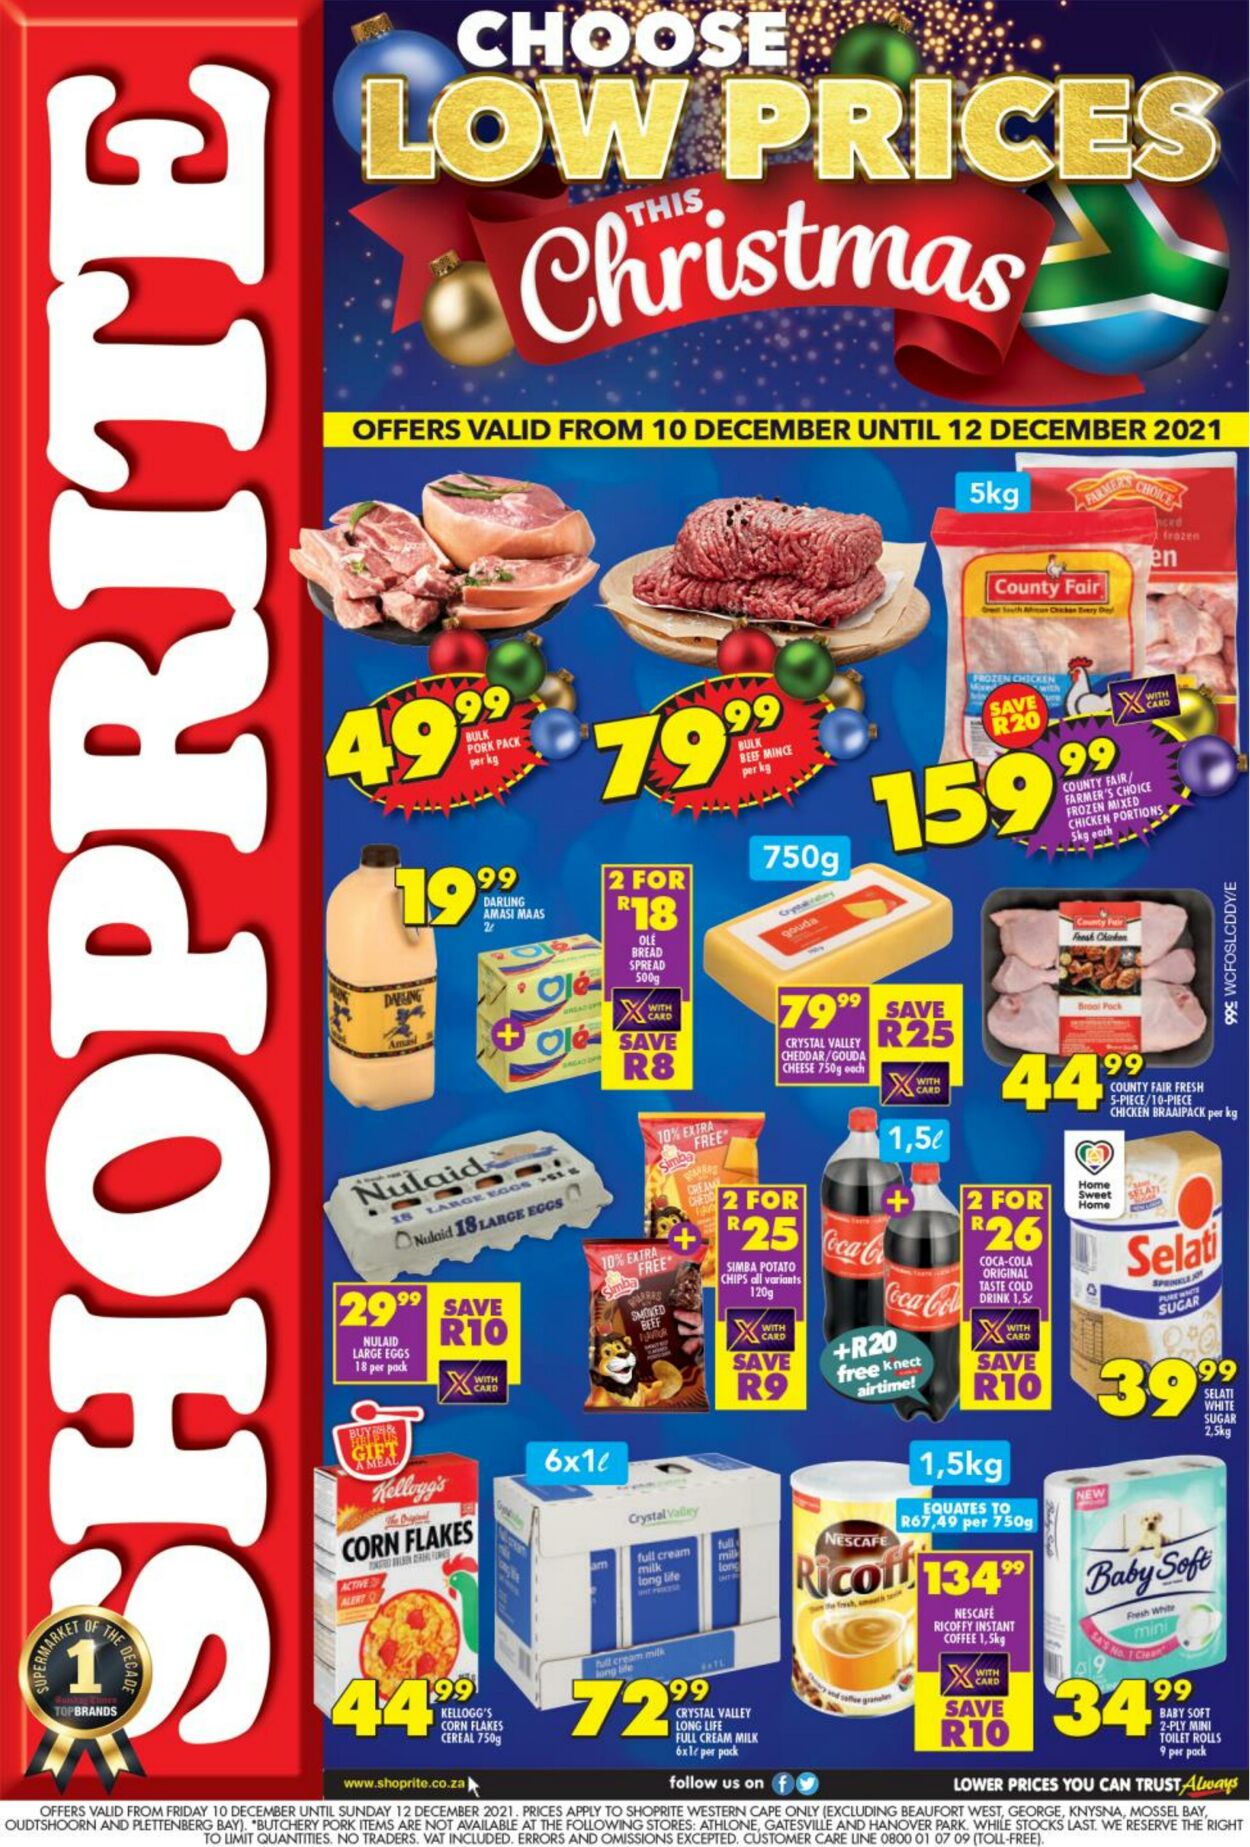 Current special Shoprite Valid from 10.12 to 12.12